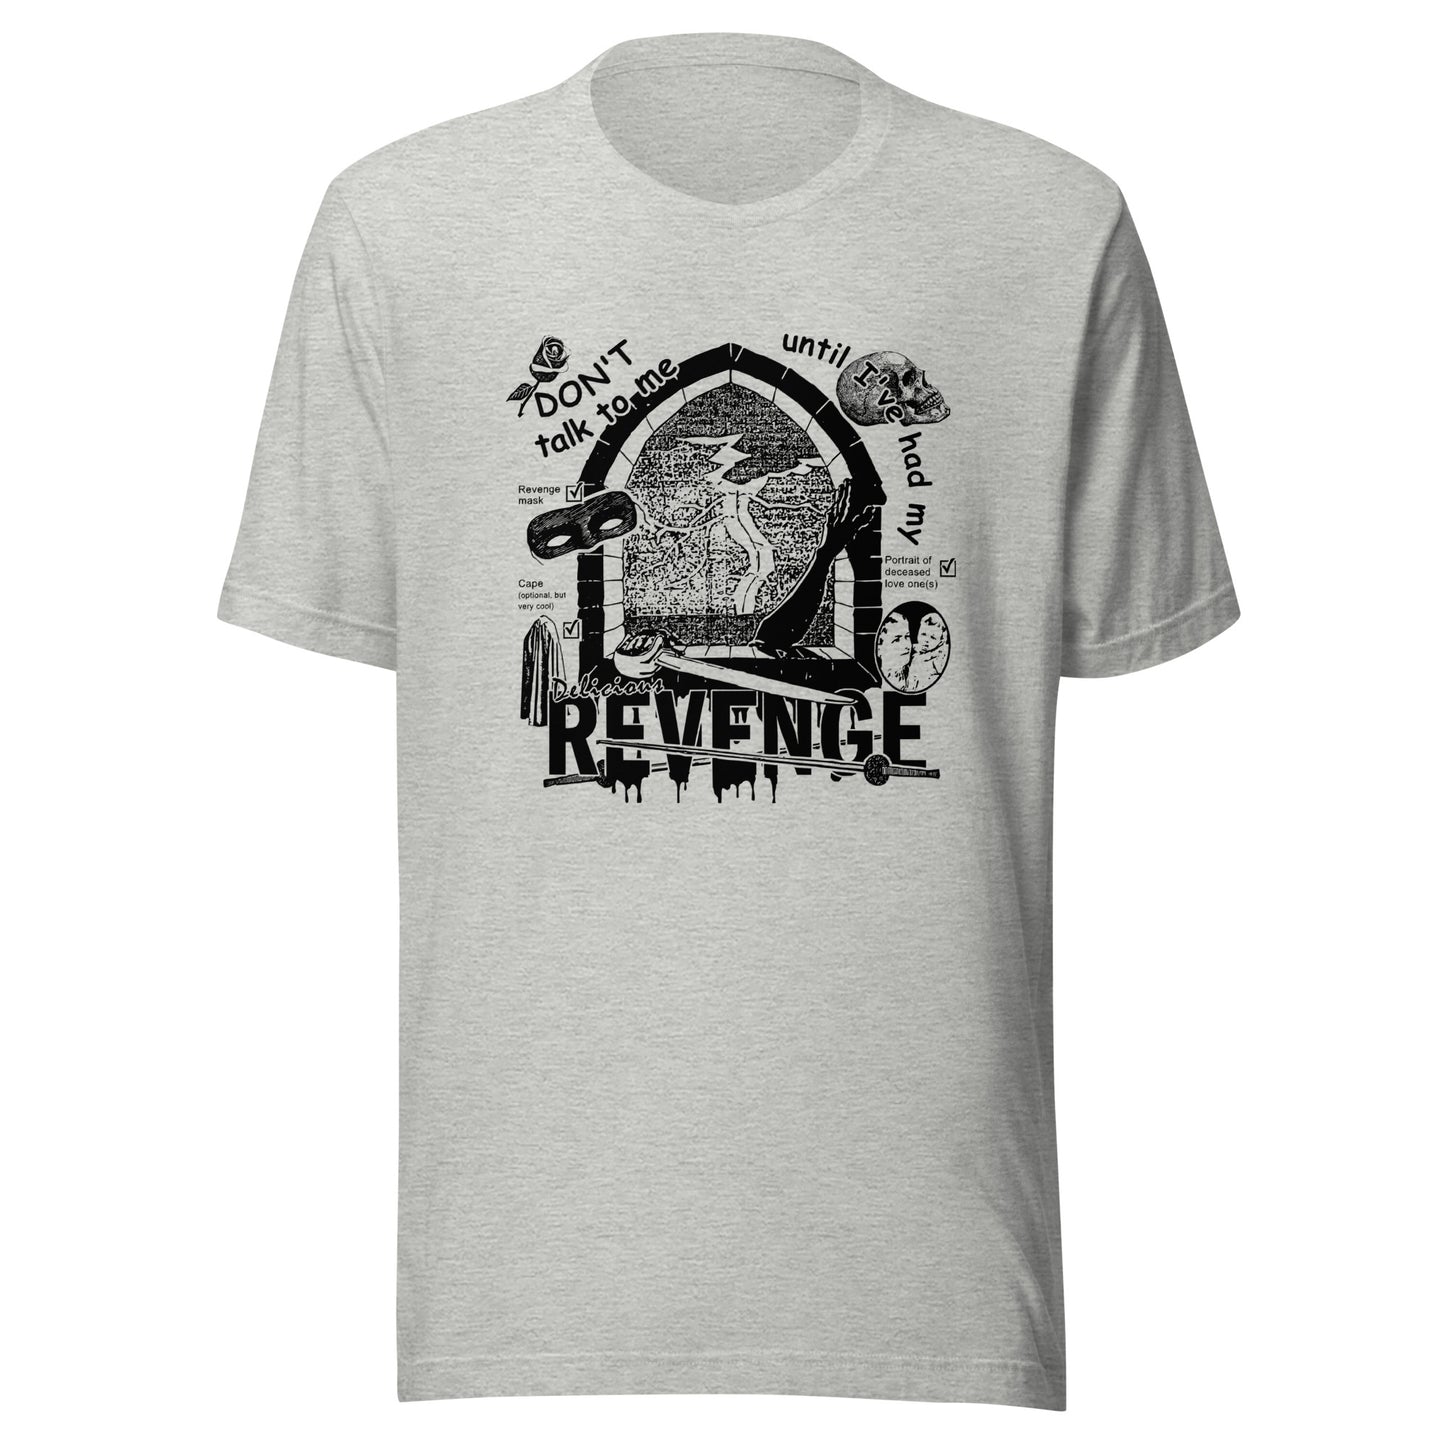 "Don't Talk to me Until I've Had My Delicious Revenge" Unisex t-shirt